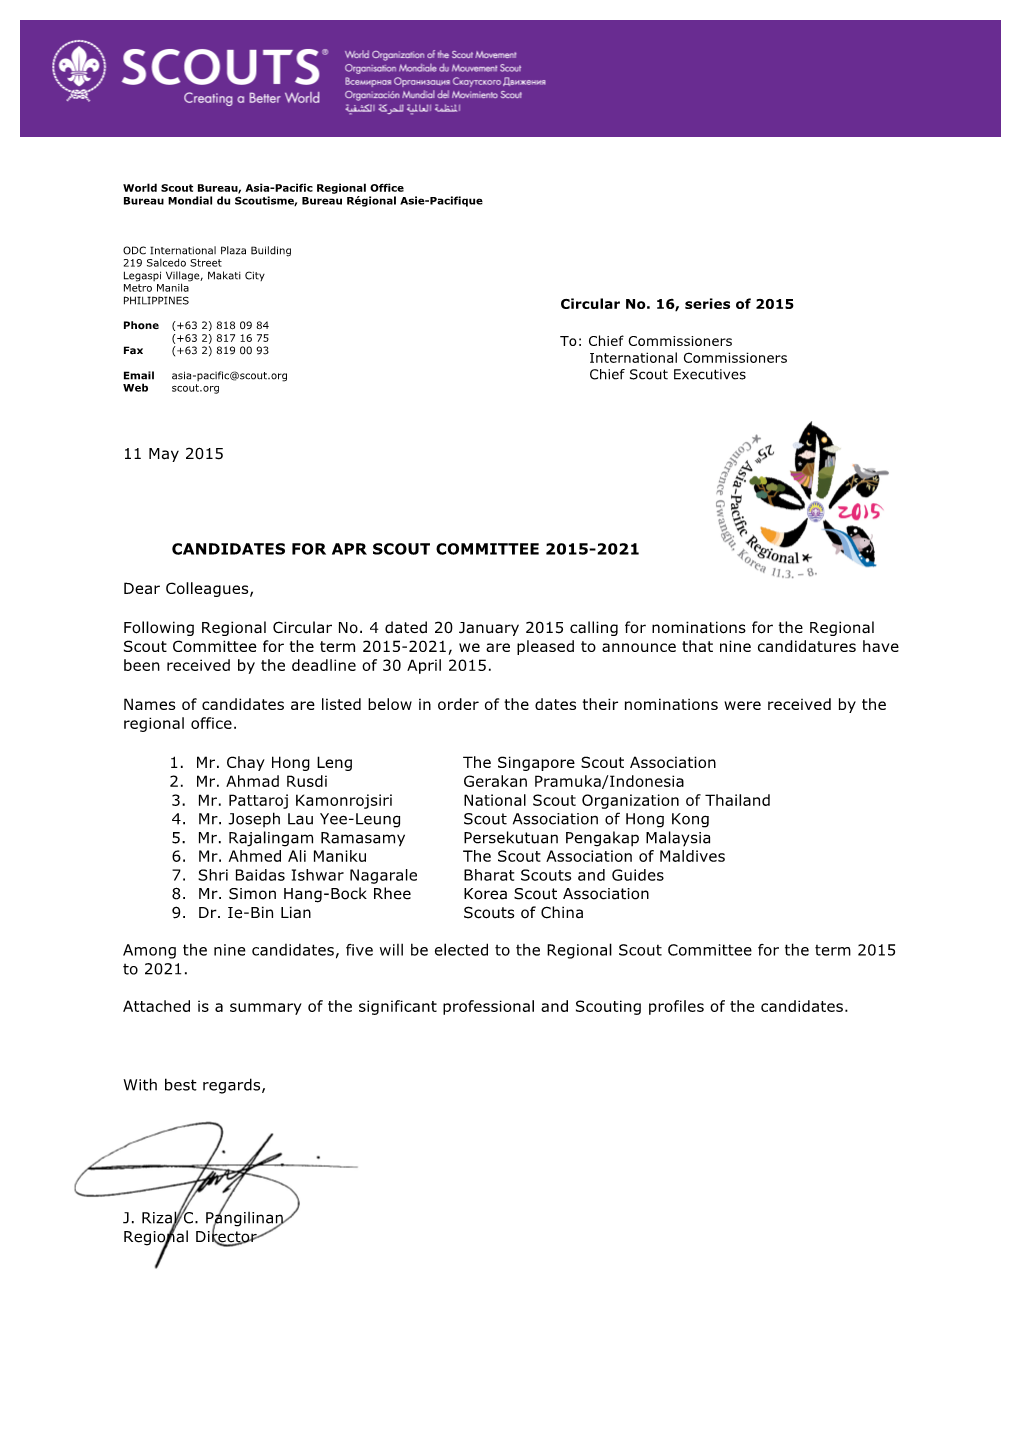 11 May 2015 CANDIDATES for APR SCOUT COMMITTEE 2015-2021